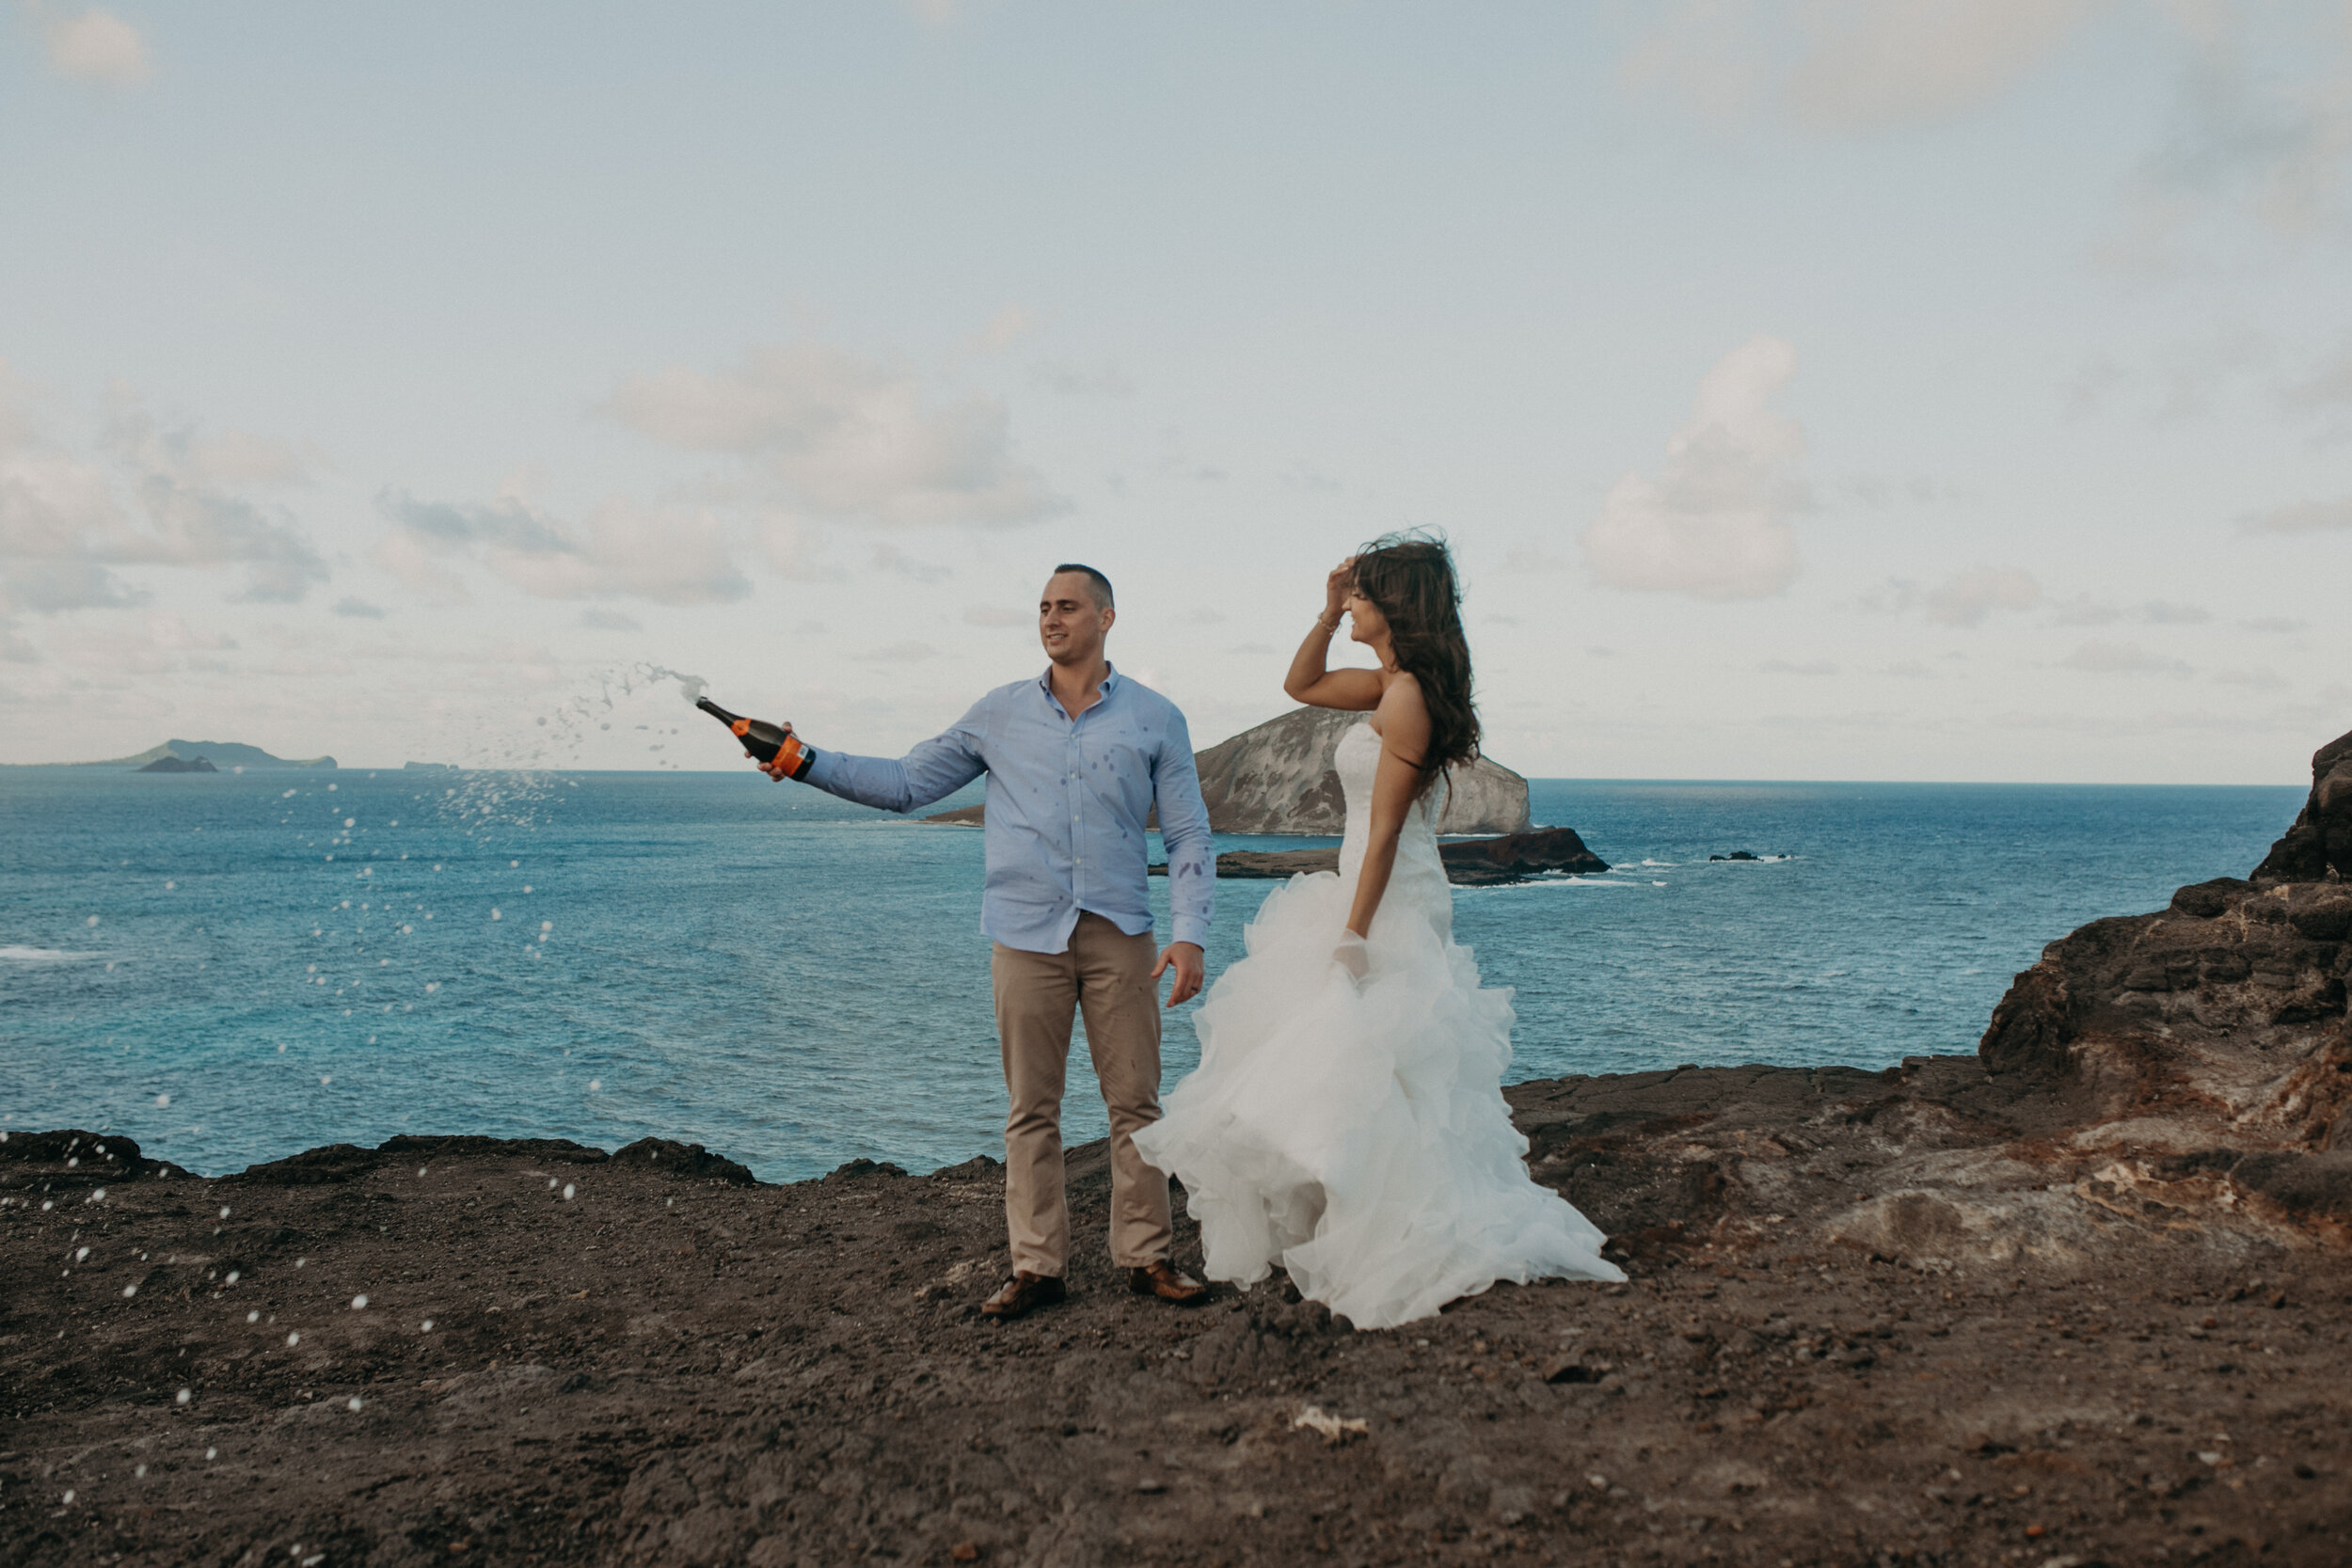  a couple pops Champagne after their elopement at Makapuu Lookout on Oahu Hawaii #elopetohawaii #hawaiielopement #oahuelopement #oahuweddingphotographer #weddingdestinations #hawaiiweddingphotographer #hawaiielopementphotographer #makapuulookout #mak